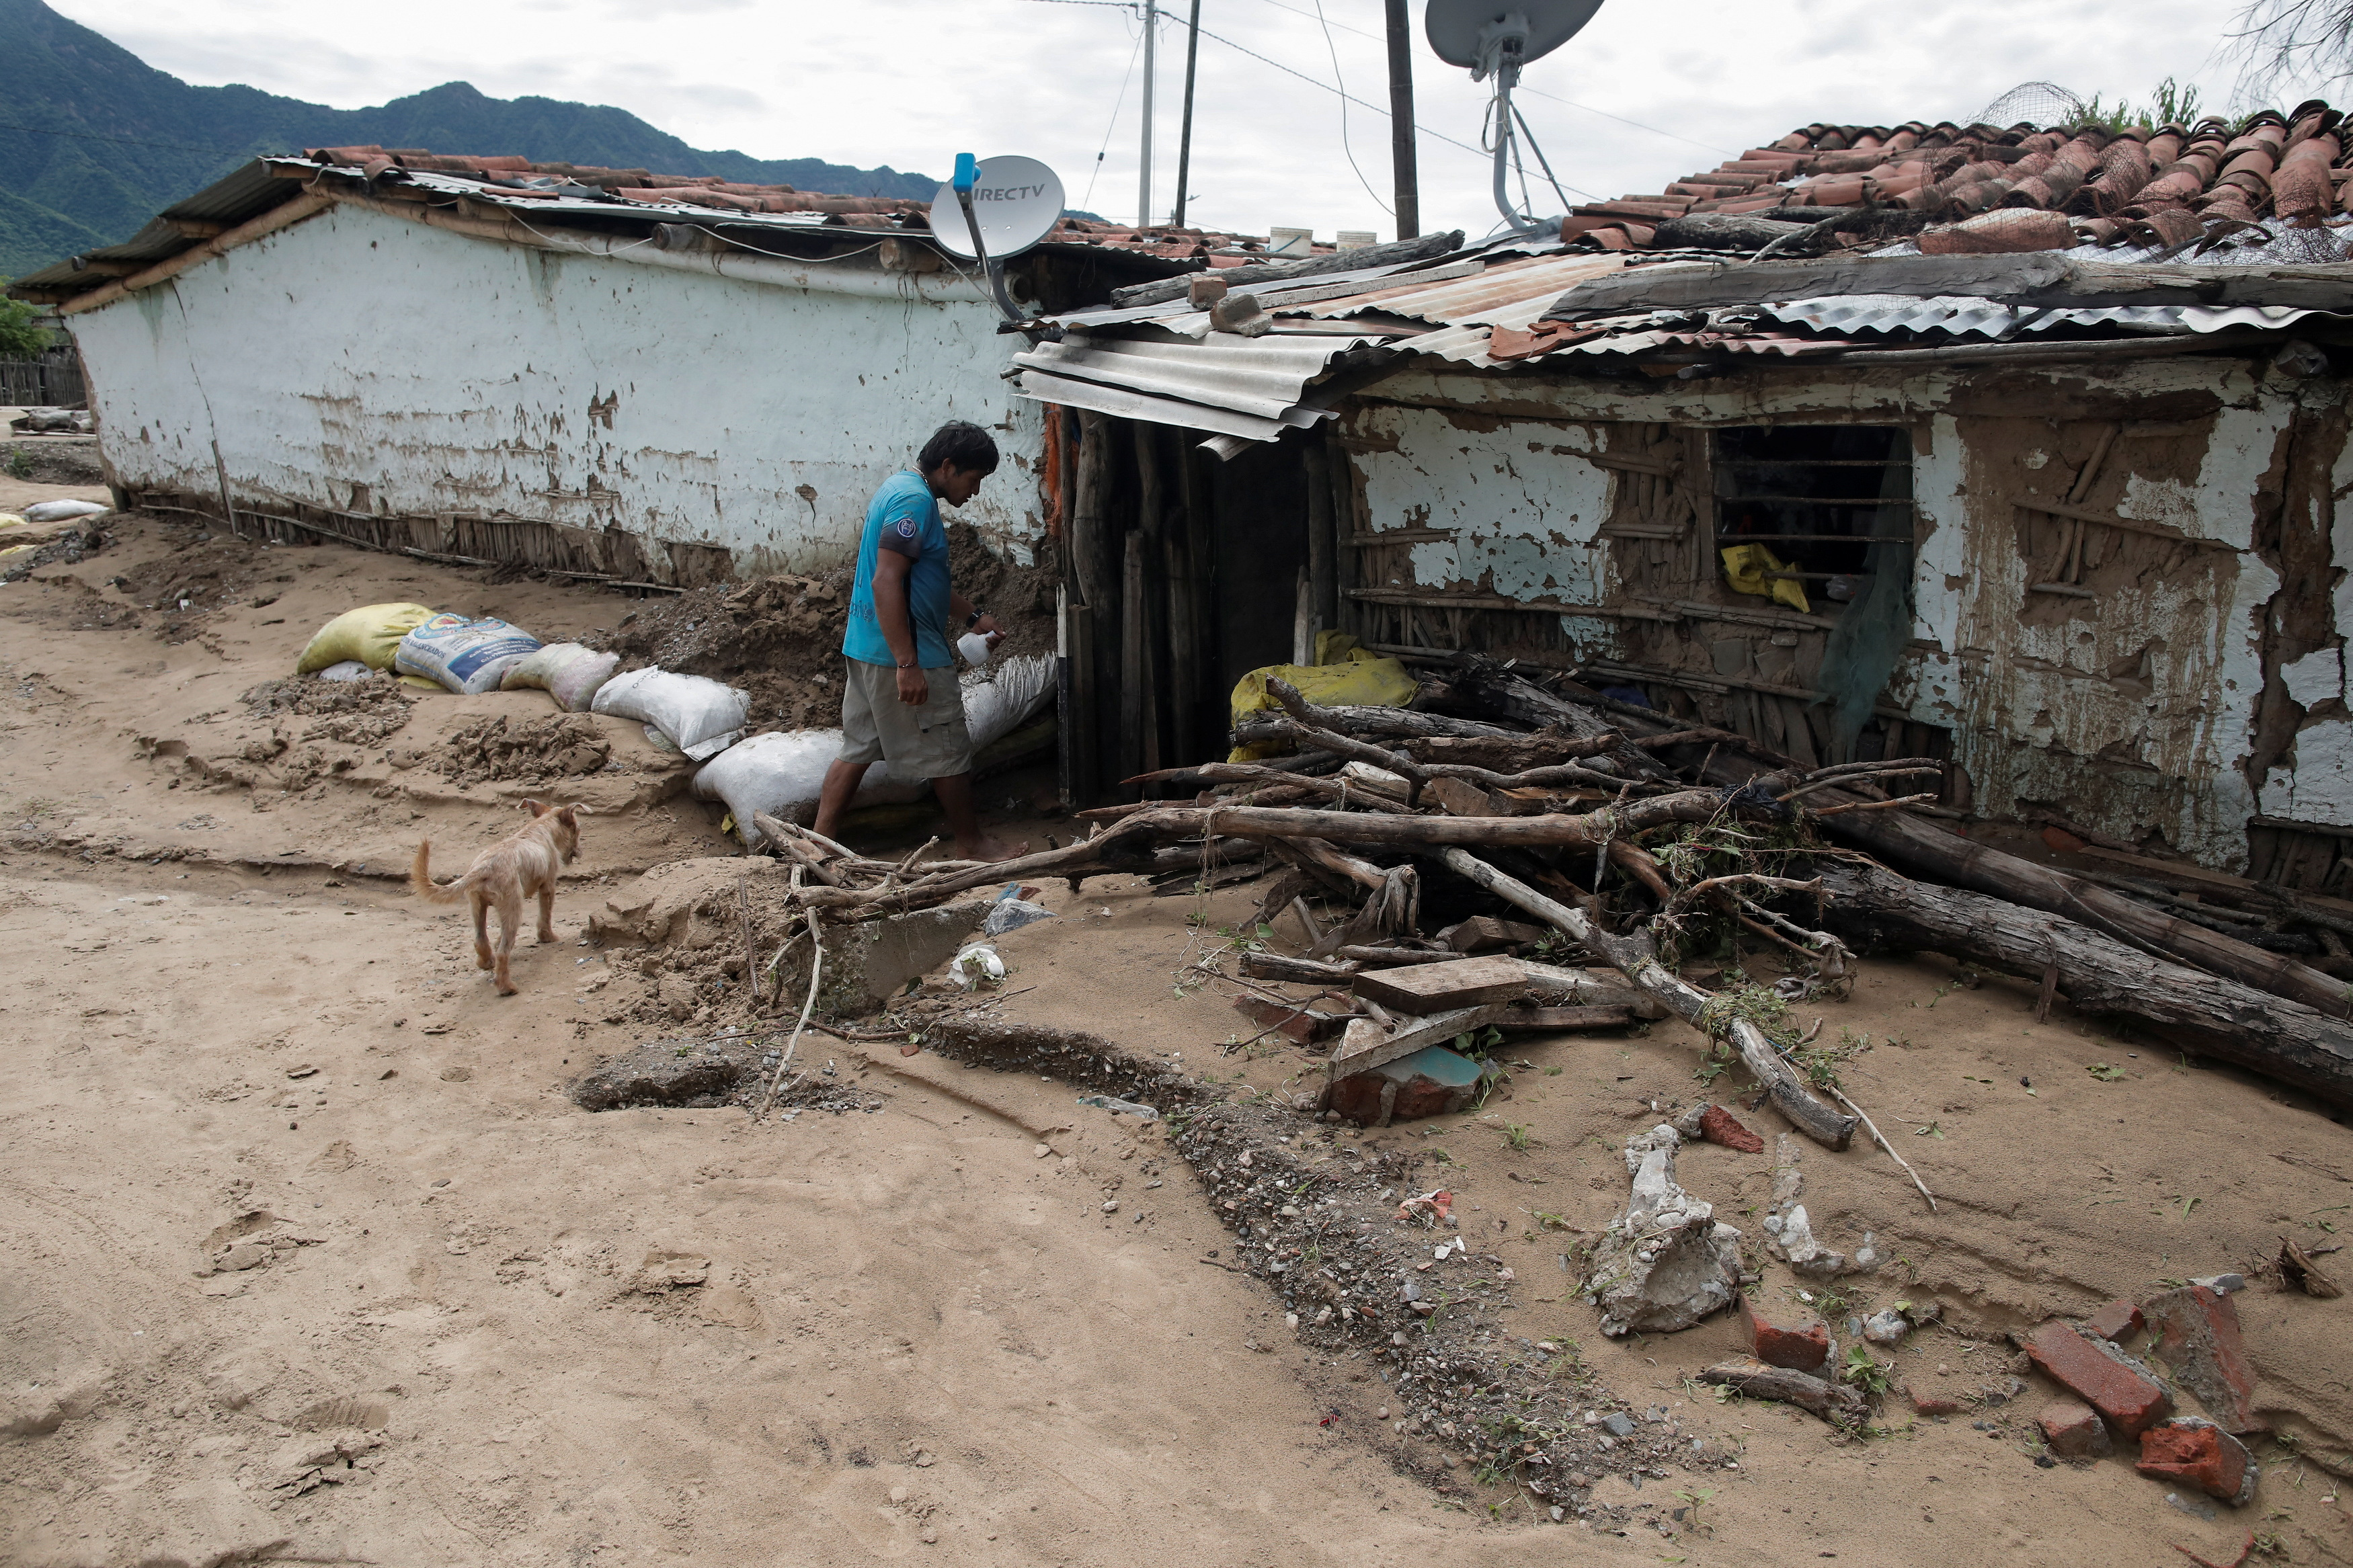 A man enters his house damaged by rains and floods caused by the direct influence of Cyclone Yaku, in Piura, Peru March 11, 2023. REUTERS/Sebastian Castaneda